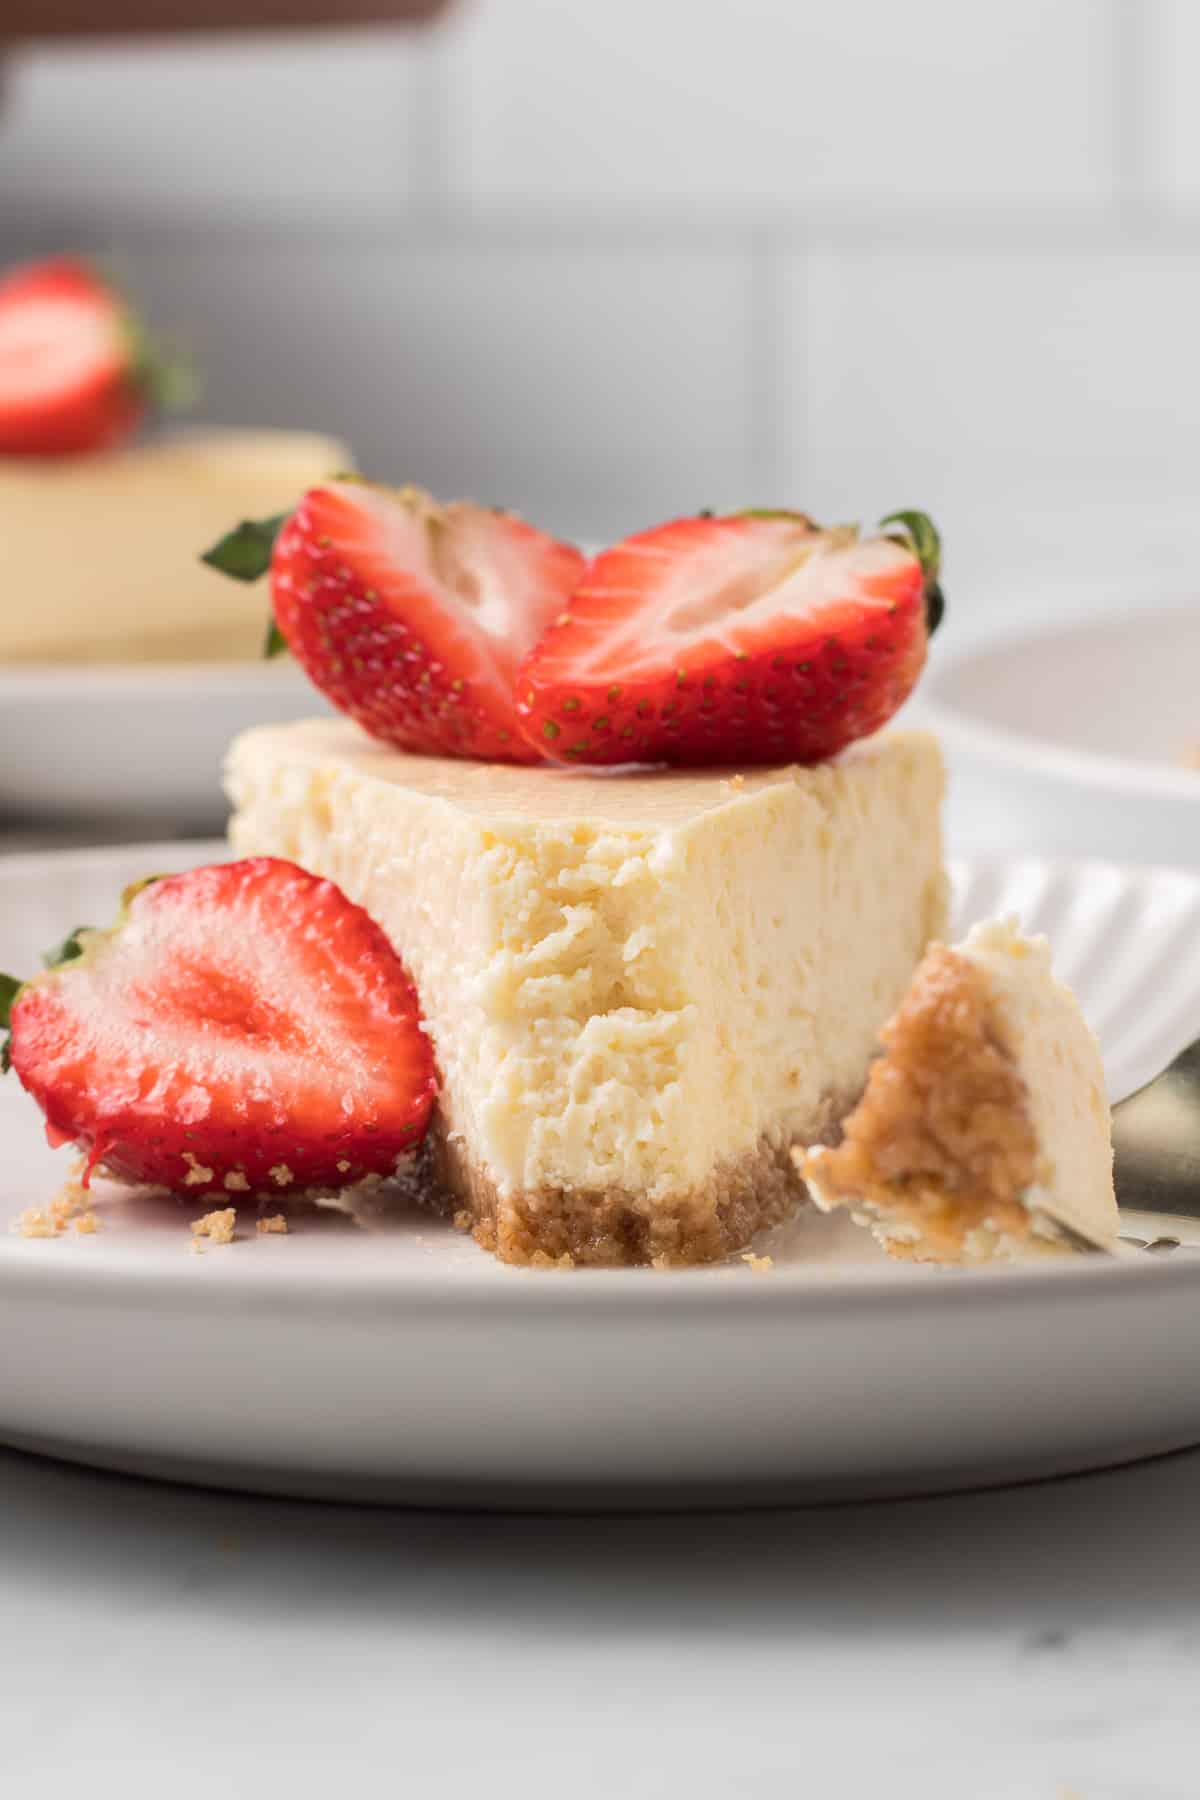 A slice of cheesecake on a white plate with a bite missing topped with strawberries.